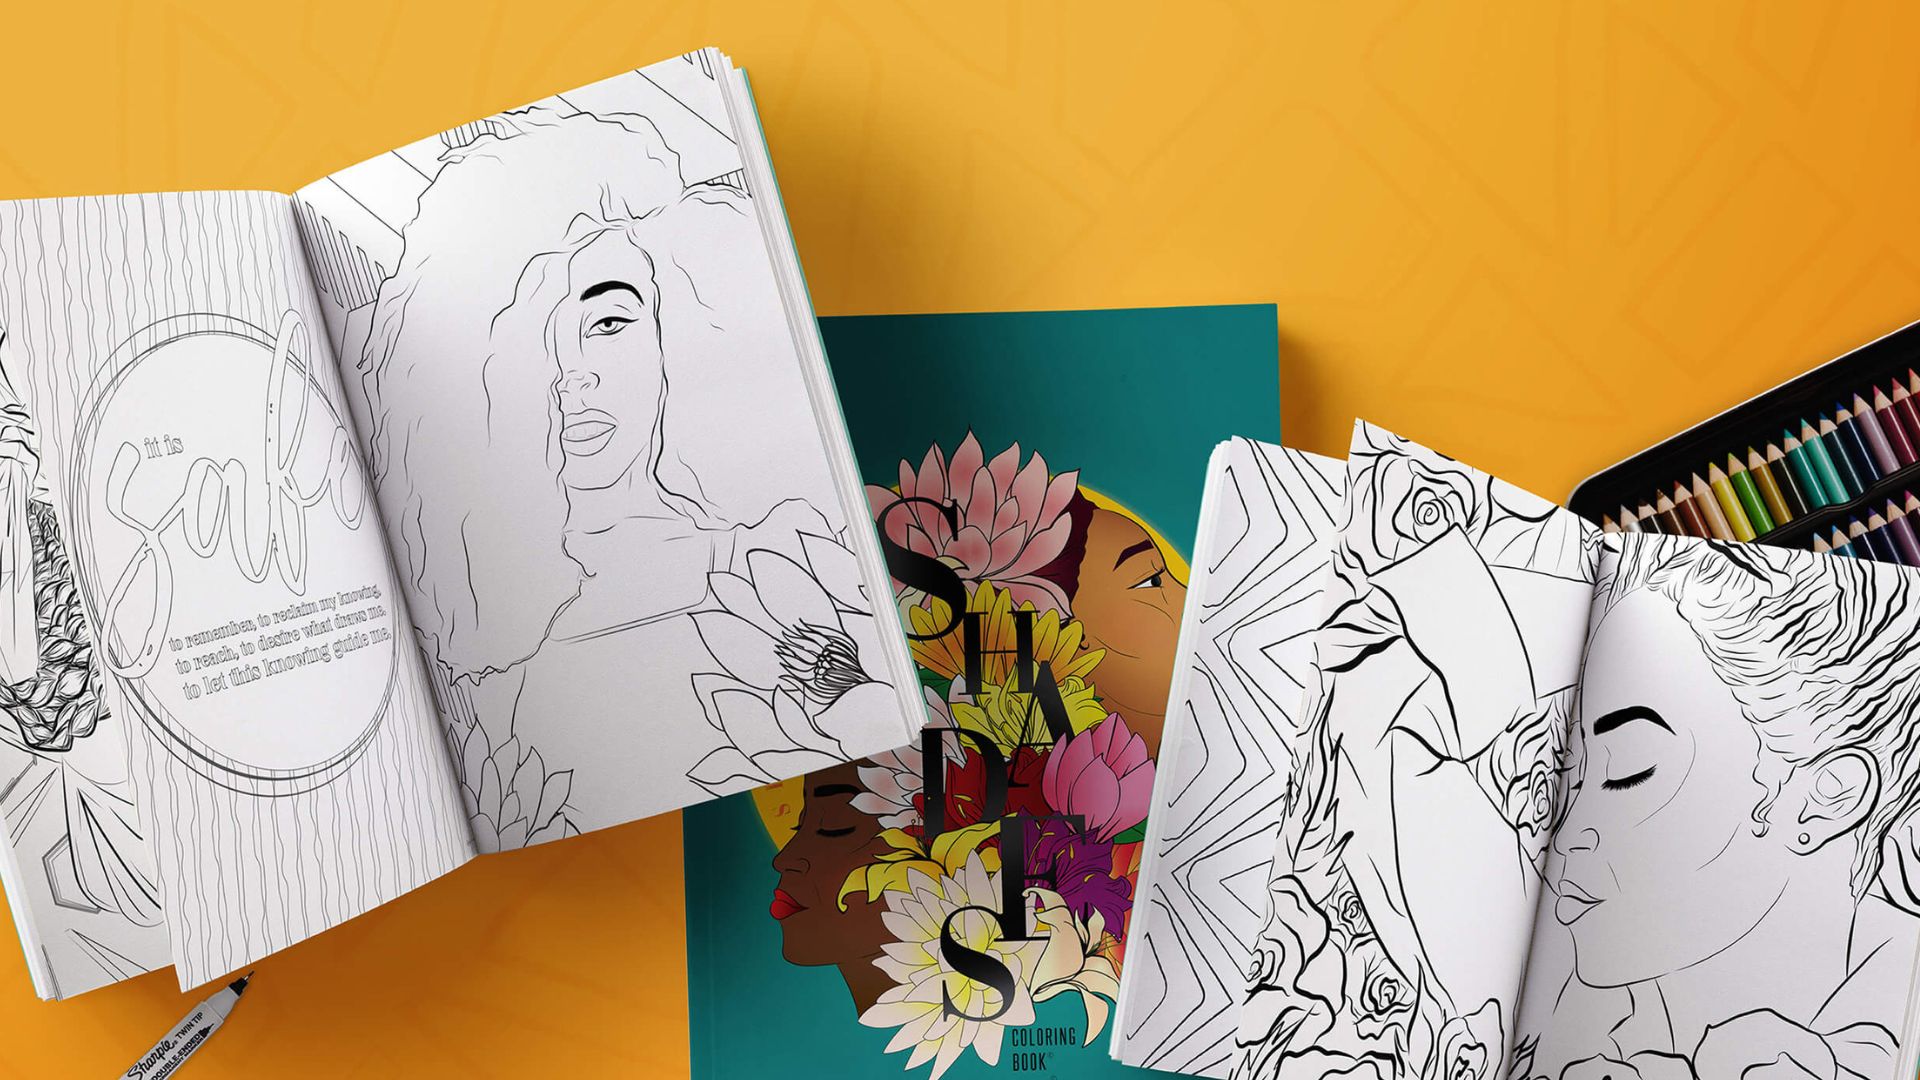 Shine In All Shades is an empowering adult coloring book.